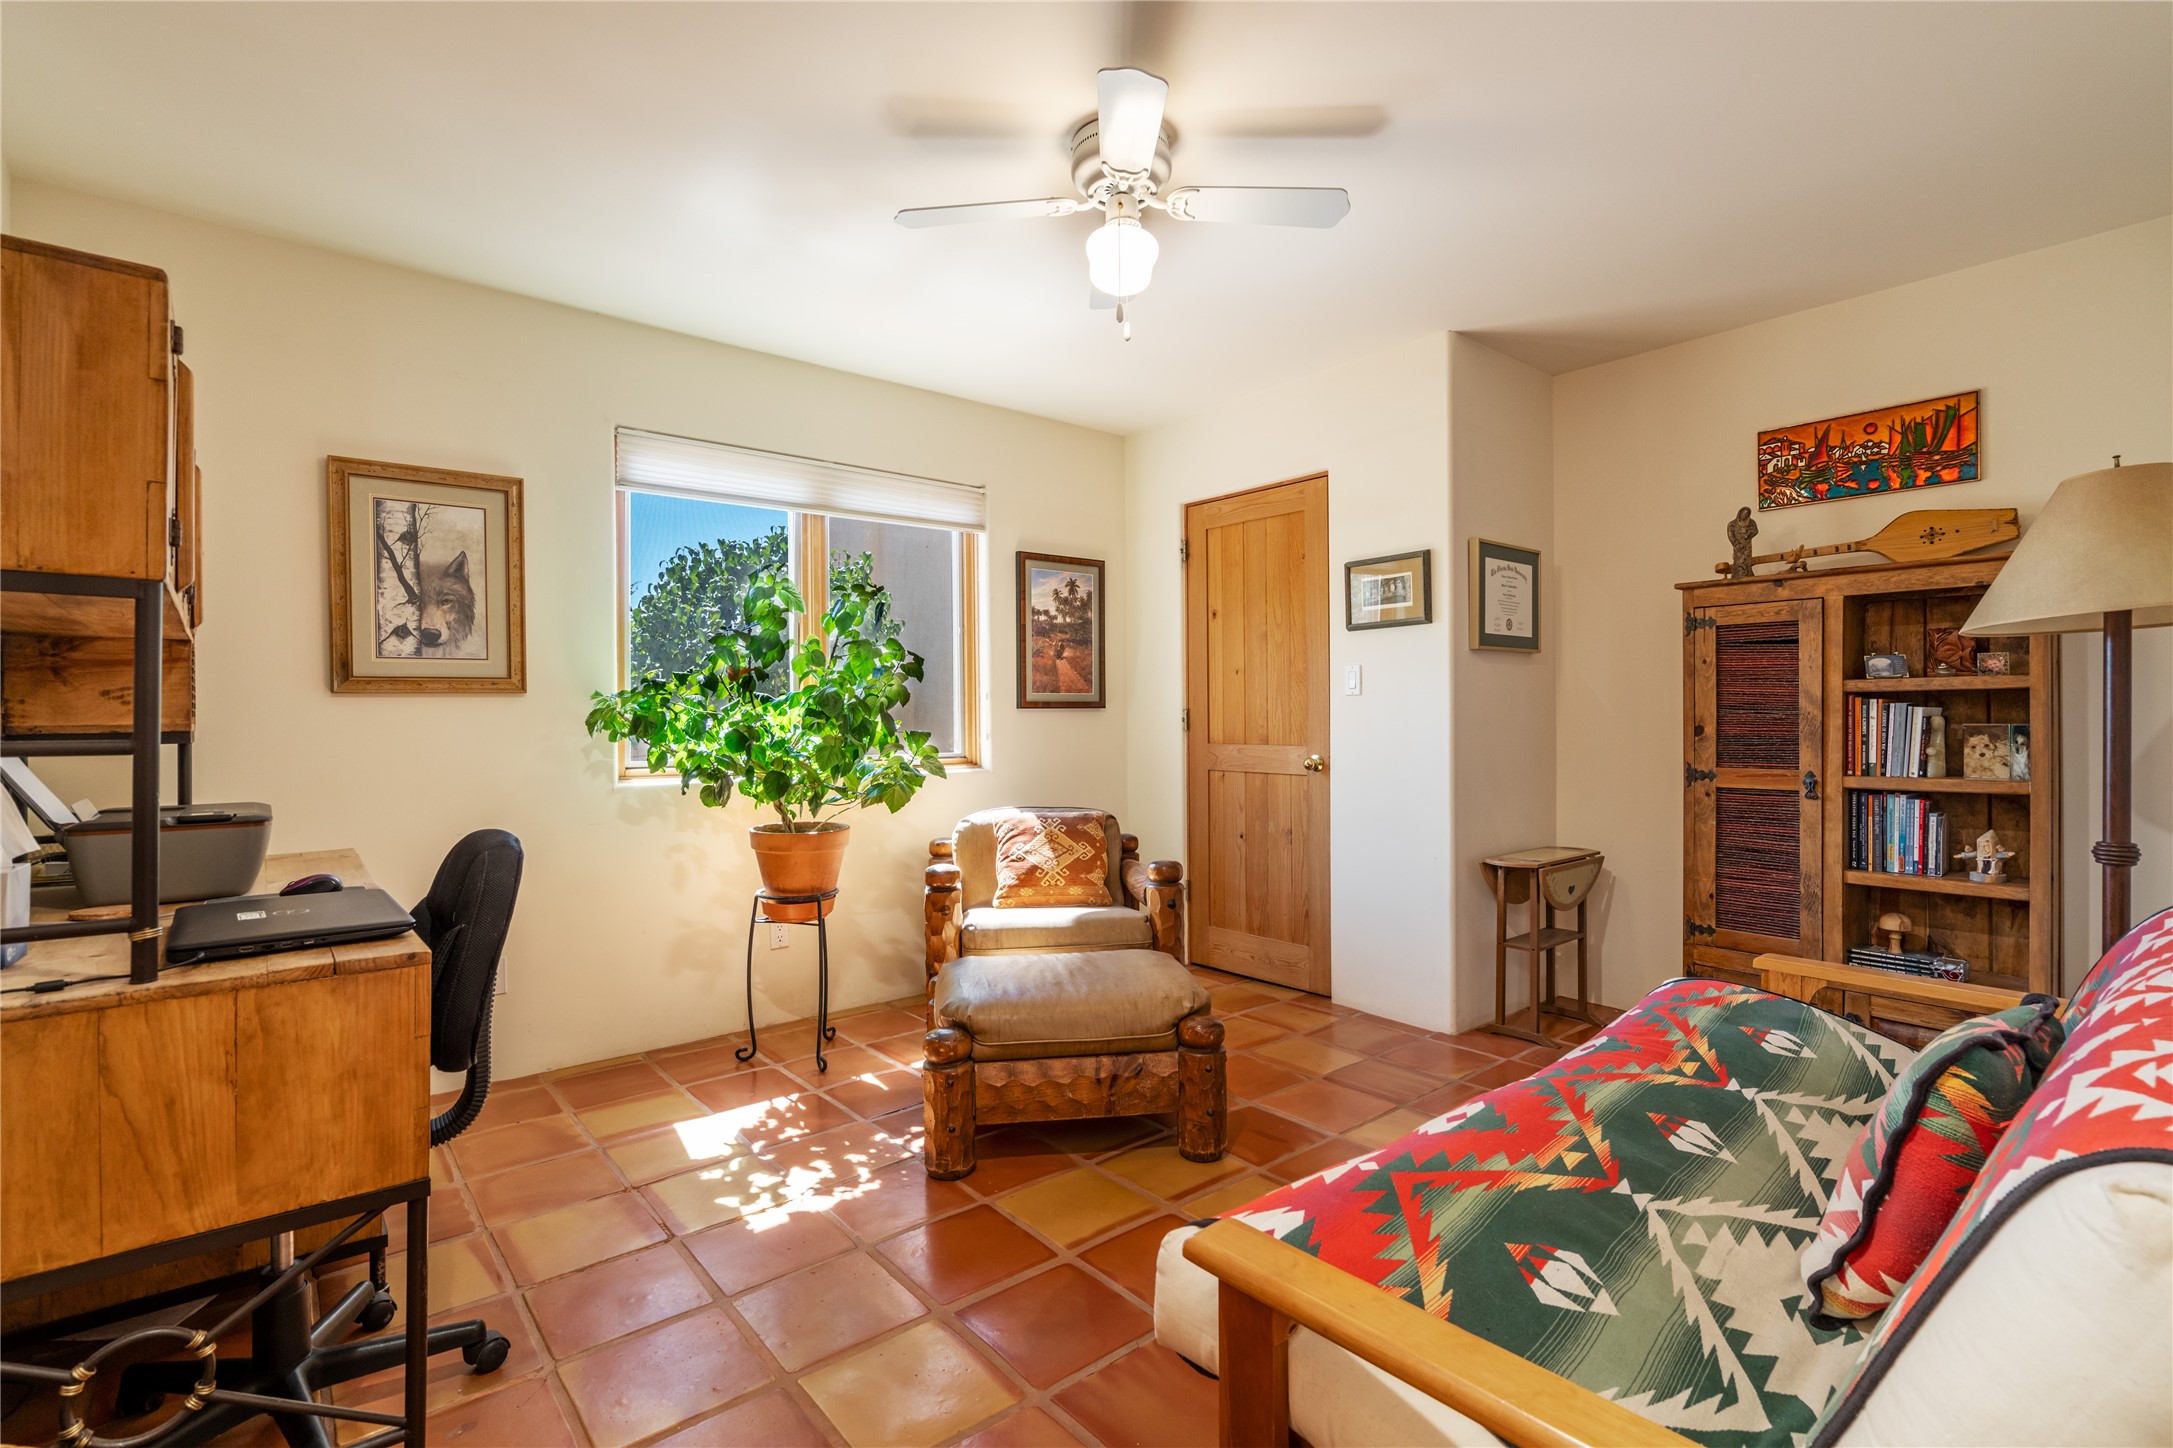 9 Calle Cabito, Santa Fe, New Mexico 87508, 4 Bedrooms Bedrooms, ,3 BathroomsBathrooms,Residential,For Sale,9 Calle Cabito,202400017